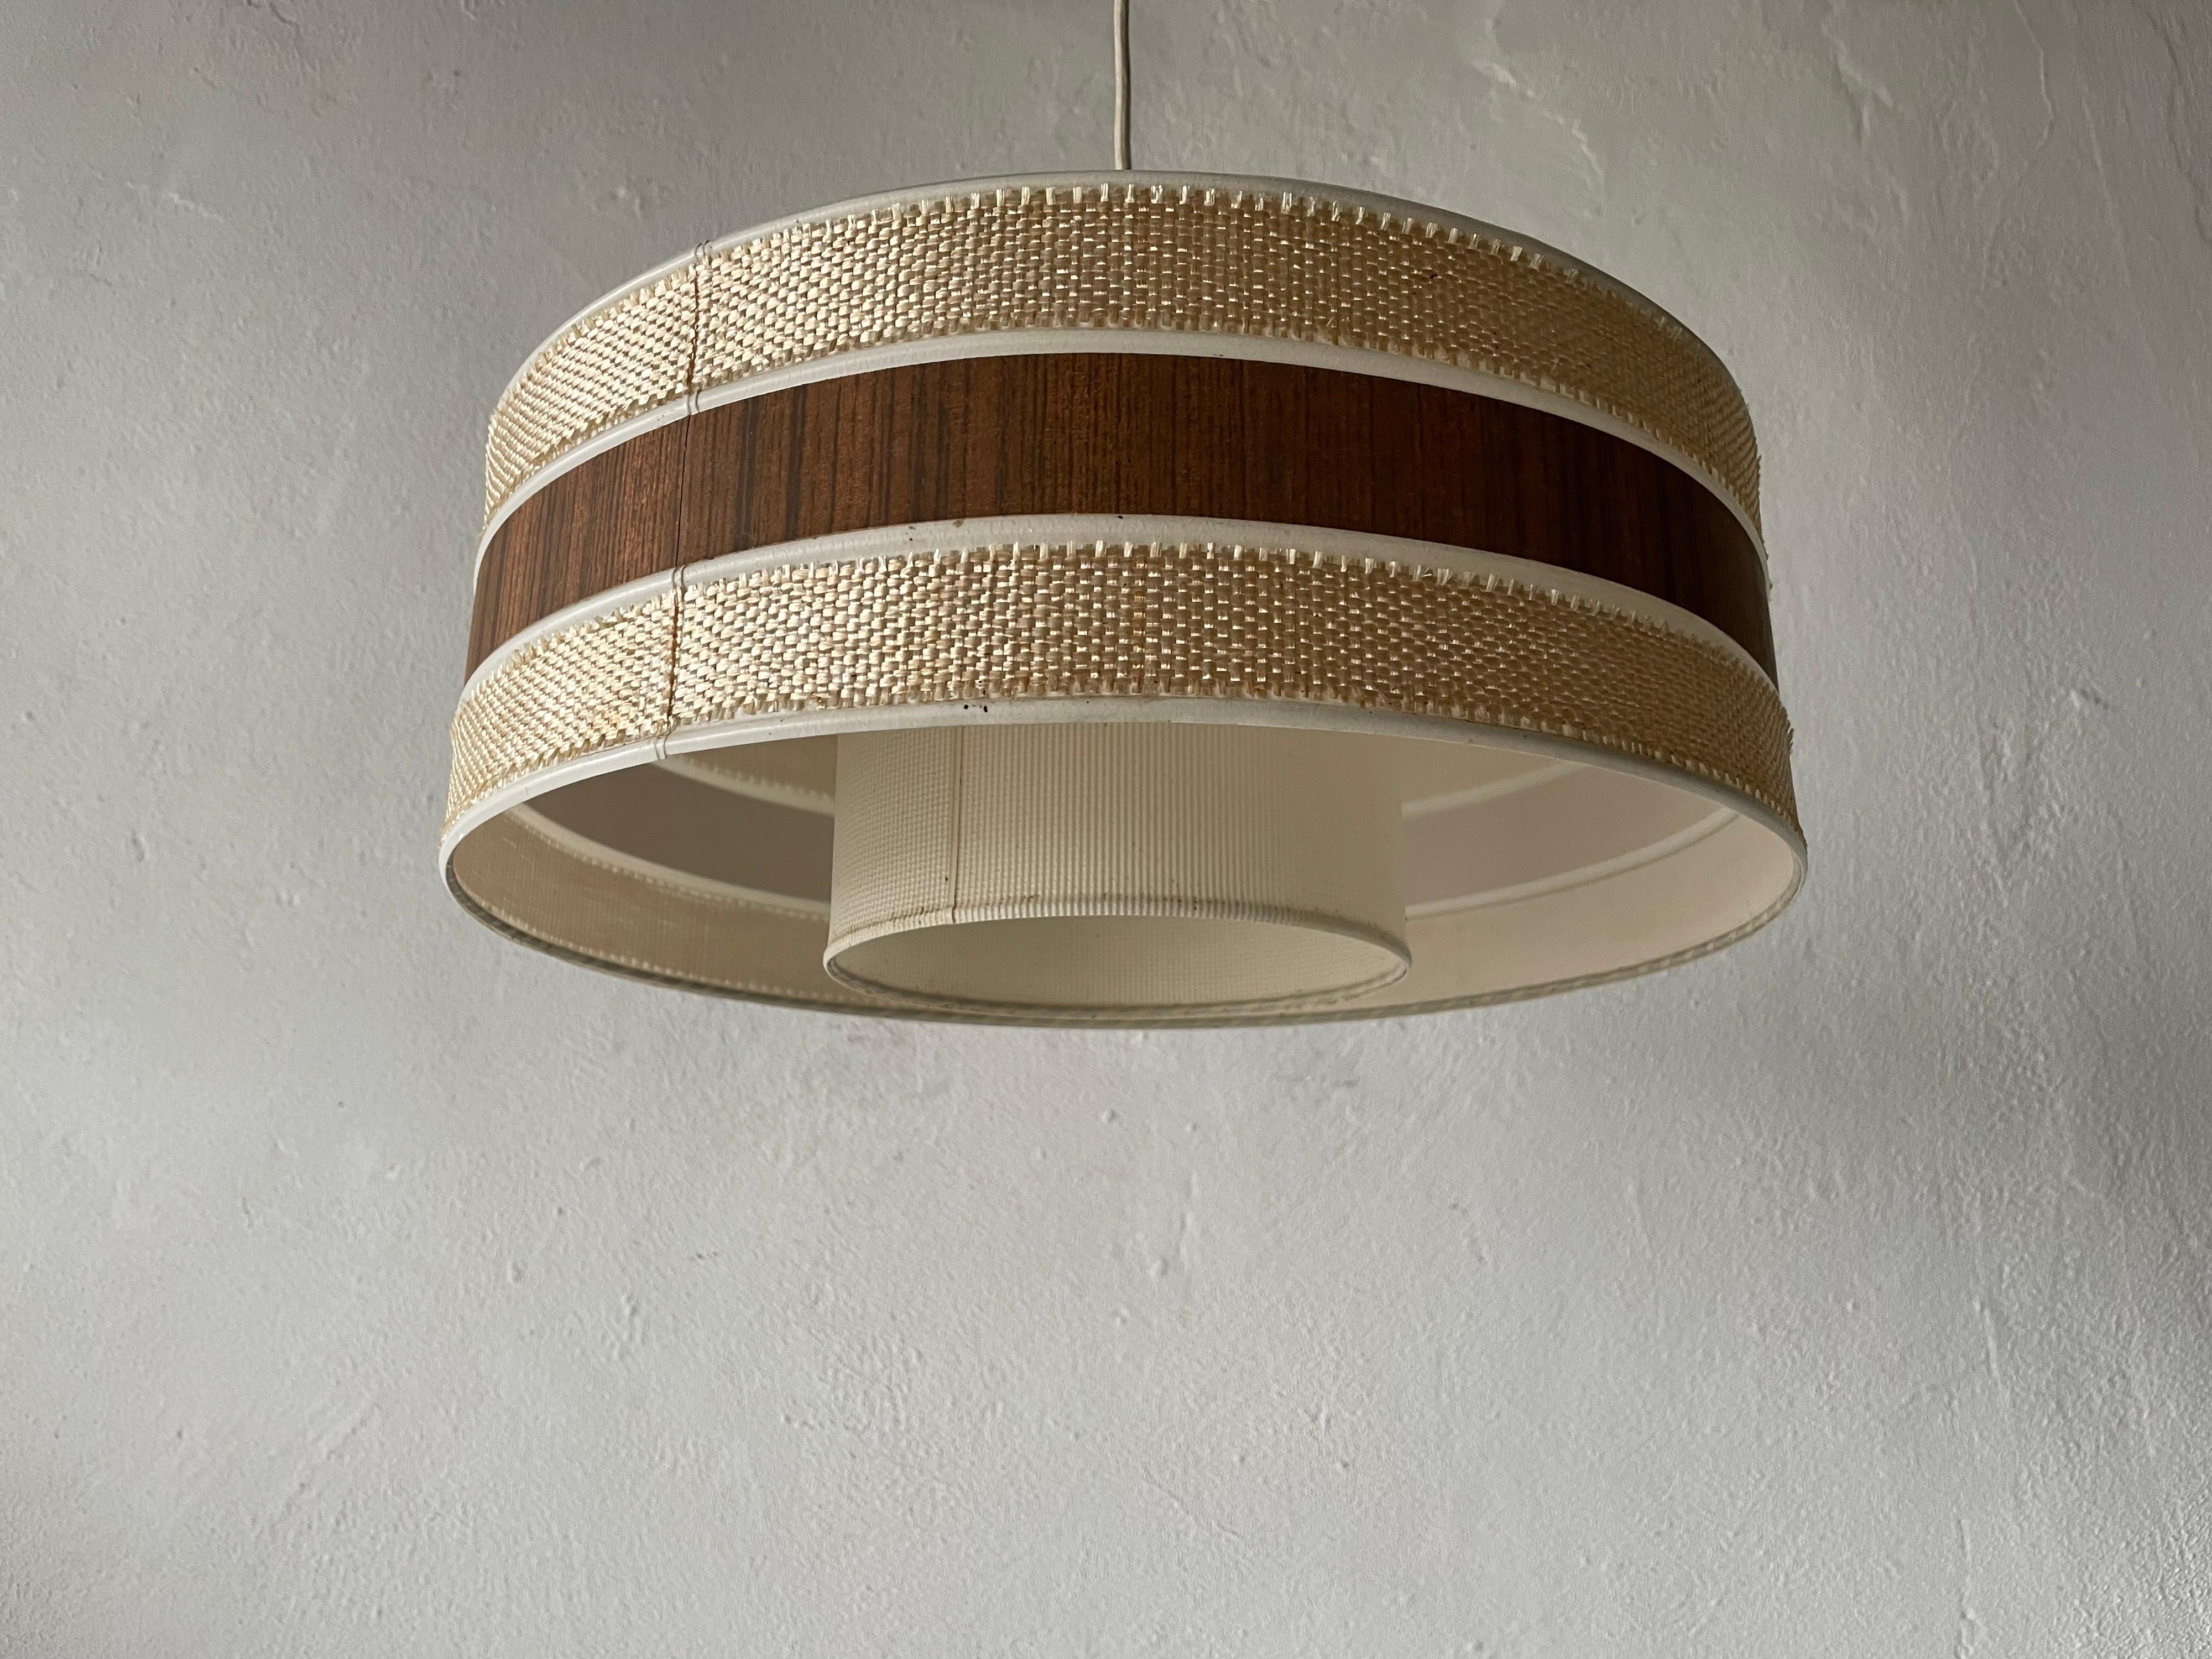 Mid-Century Modern Rare Wooden and Fabric Mid-Century Pendant Lamp by Temde, 1960s Germany